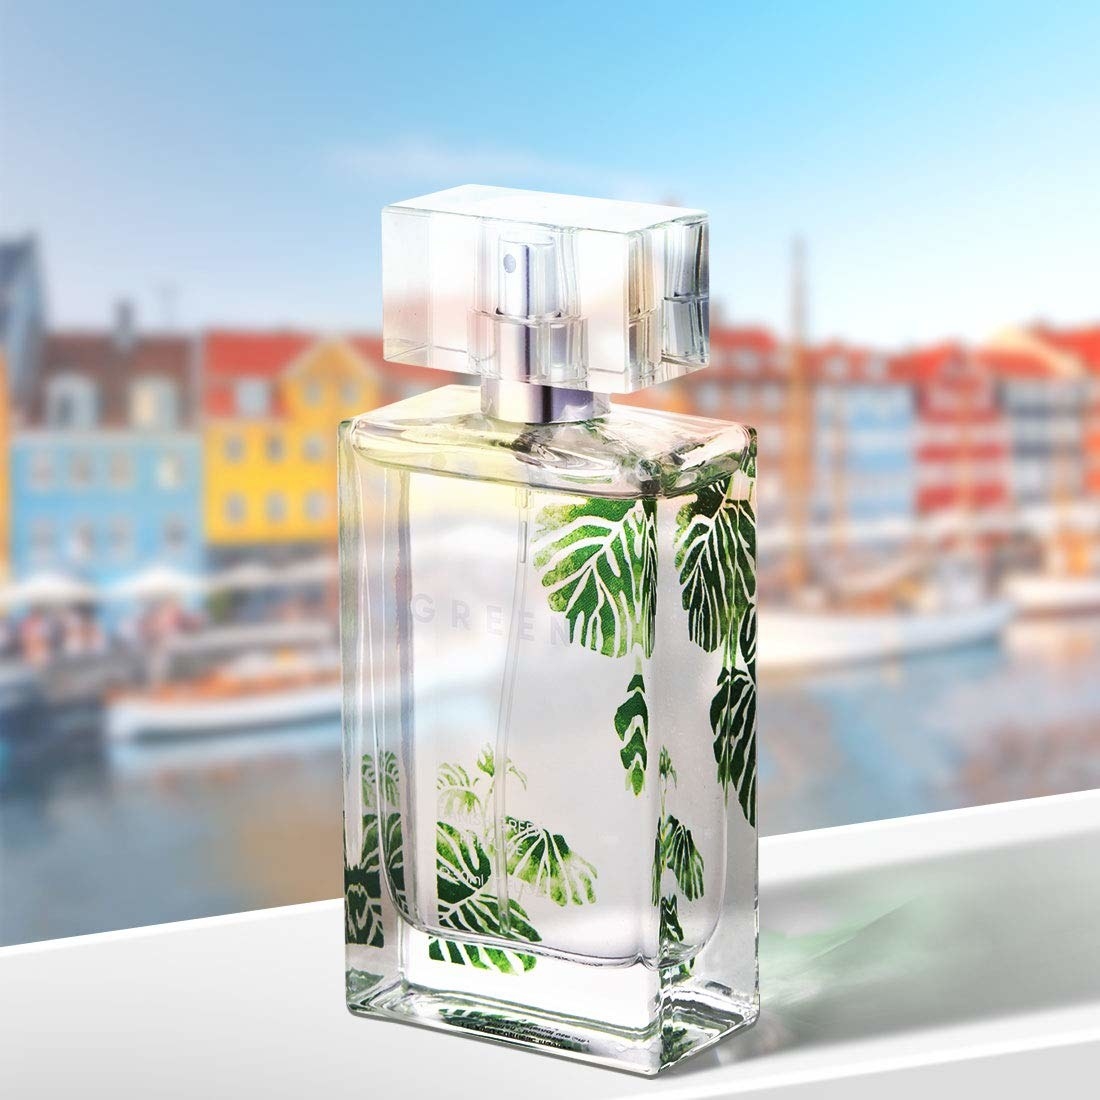 A glass perfume bottle with green leaves printed on it in the scent Danish Green